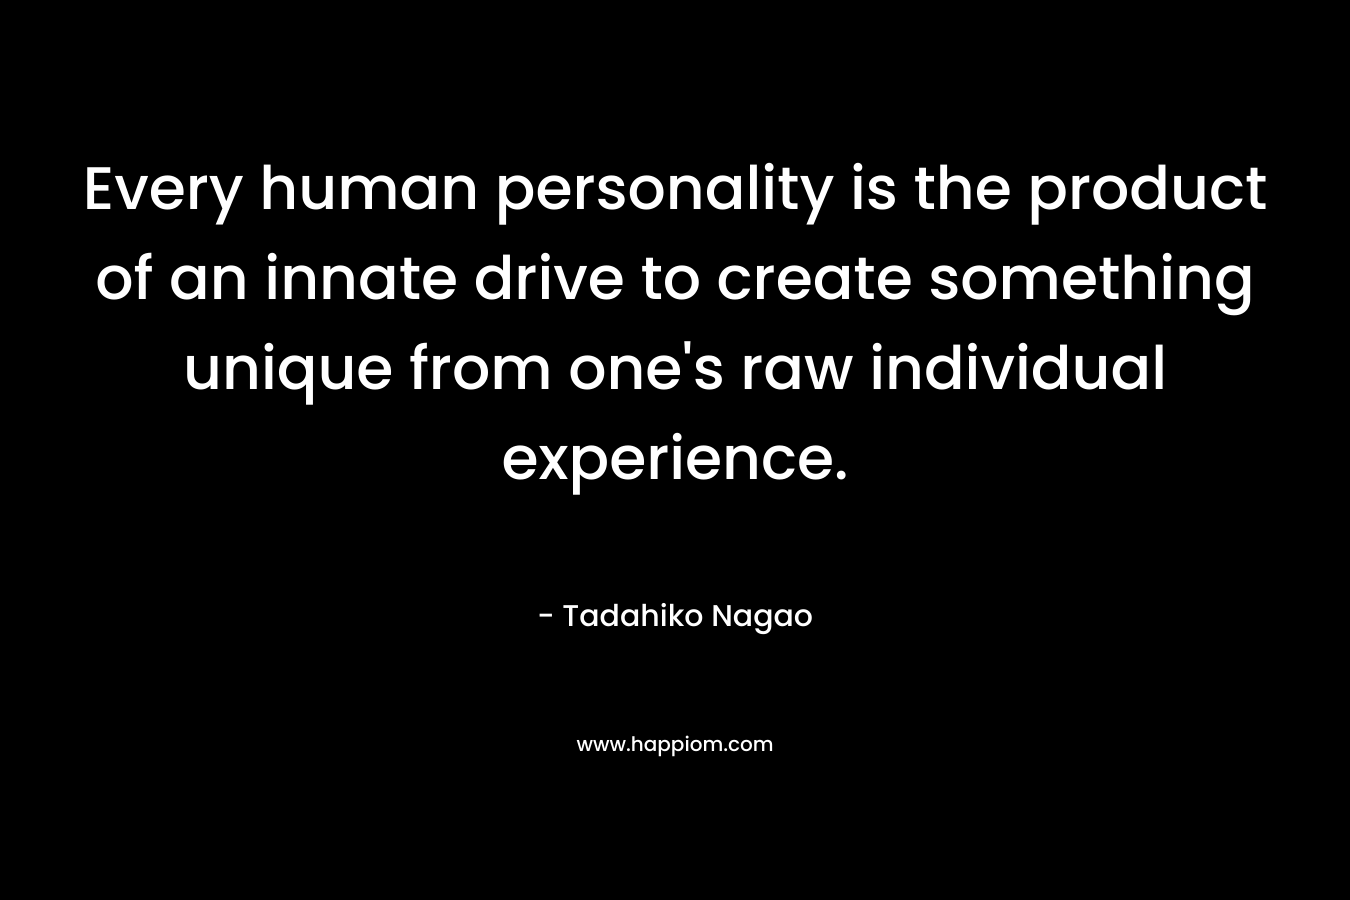 Every human personality is the product of an innate drive to create something unique from one’s raw individual experience. – Tadahiko Nagao